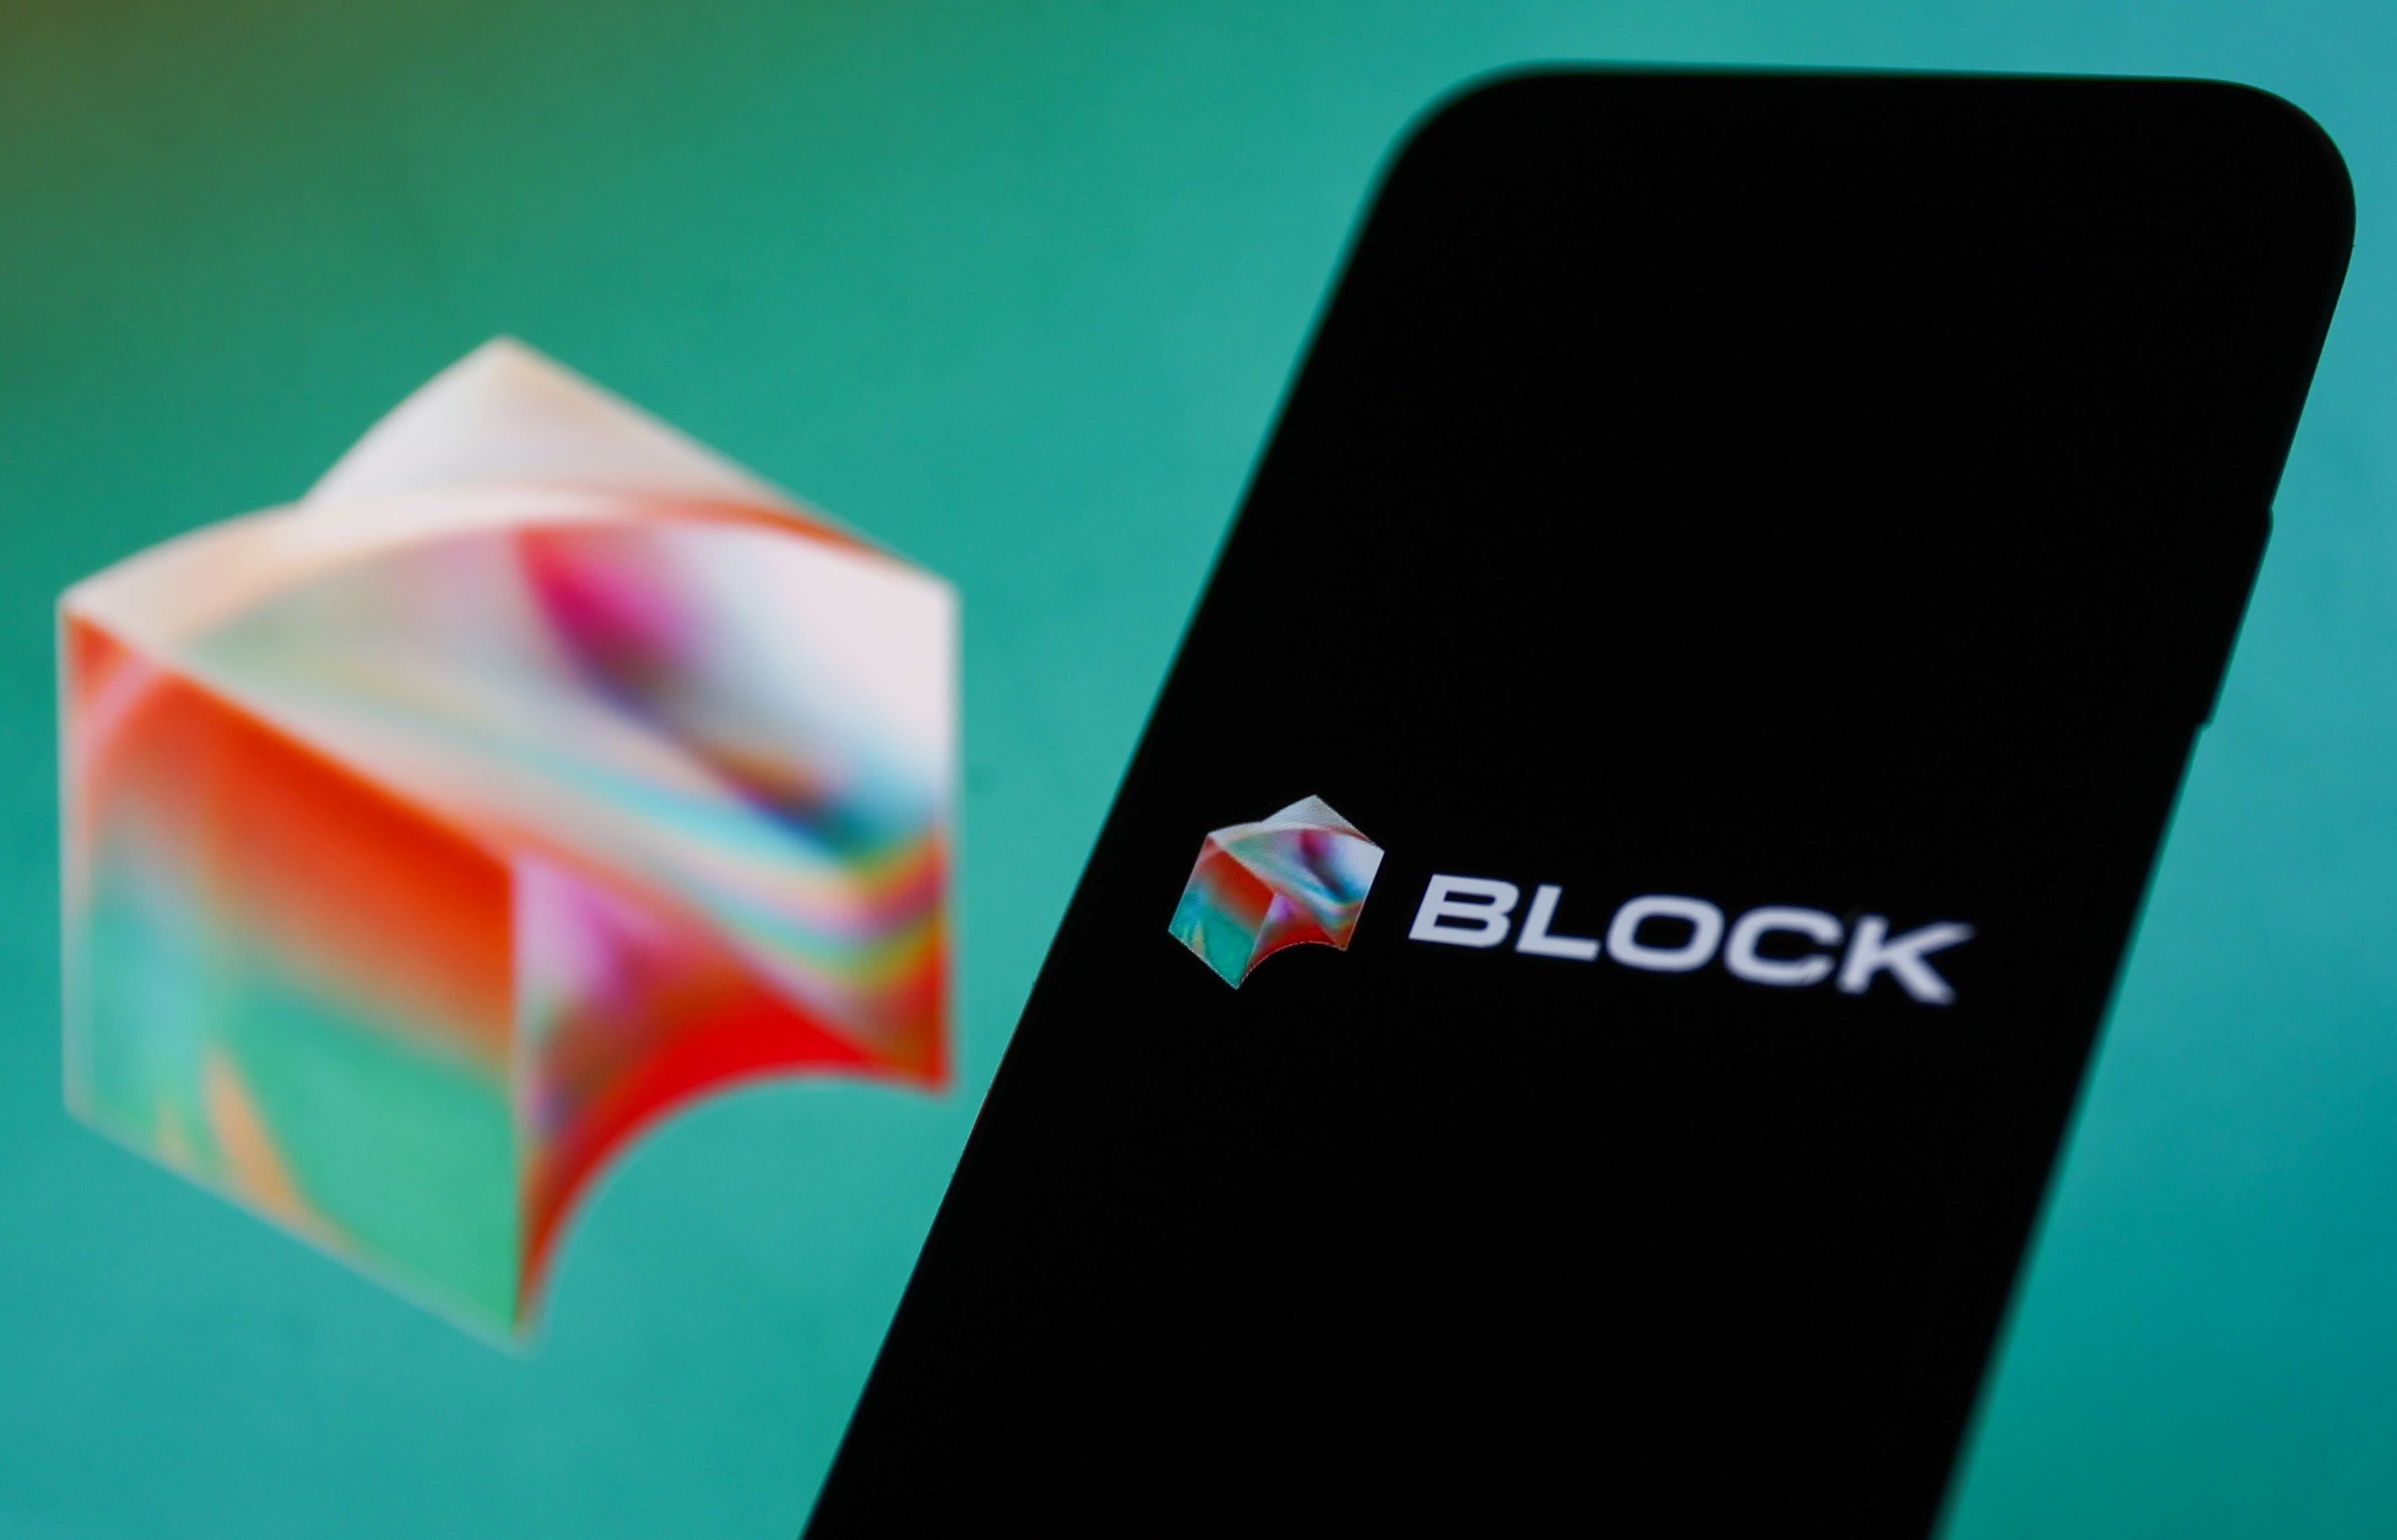 Alyssa Henry, CEO of Block’s Square company, announces departure from business